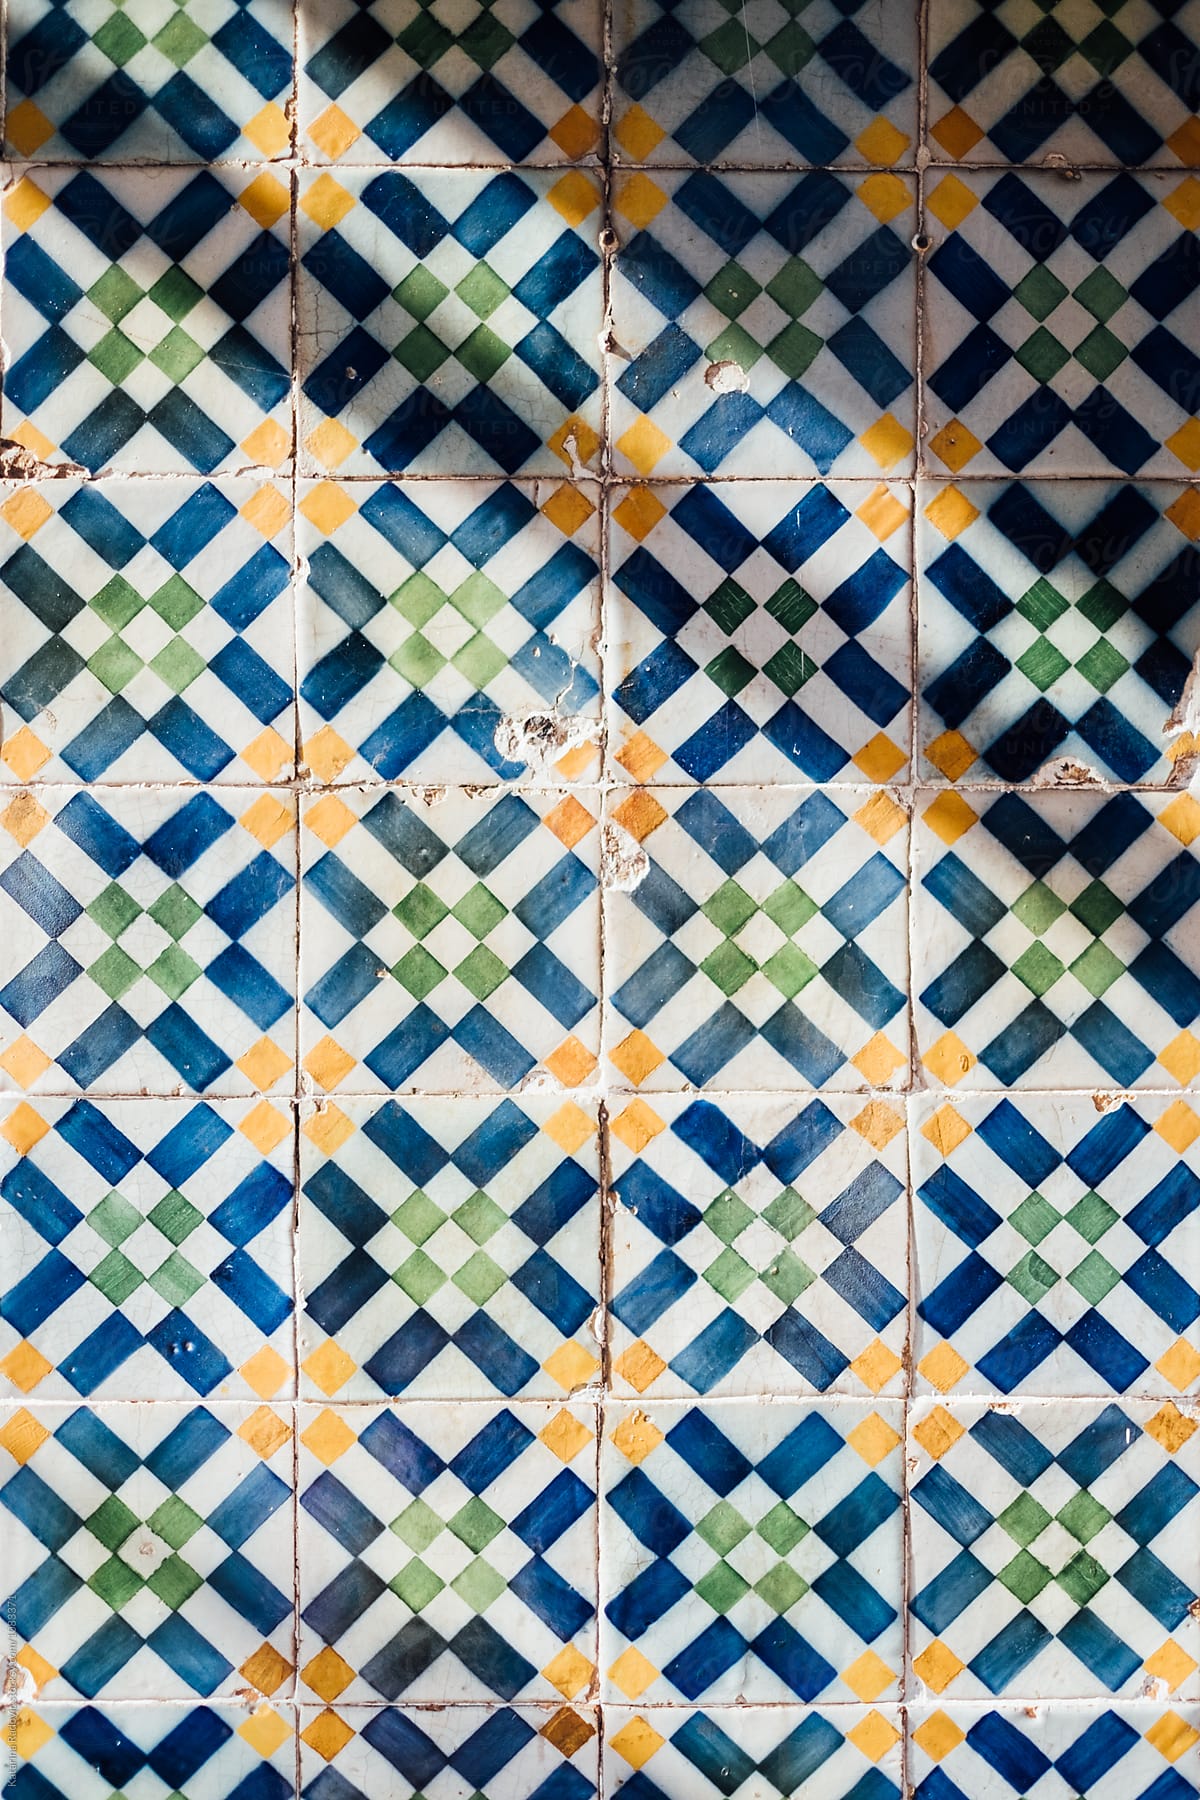 Colourful and Decorative Tiles on the Wall